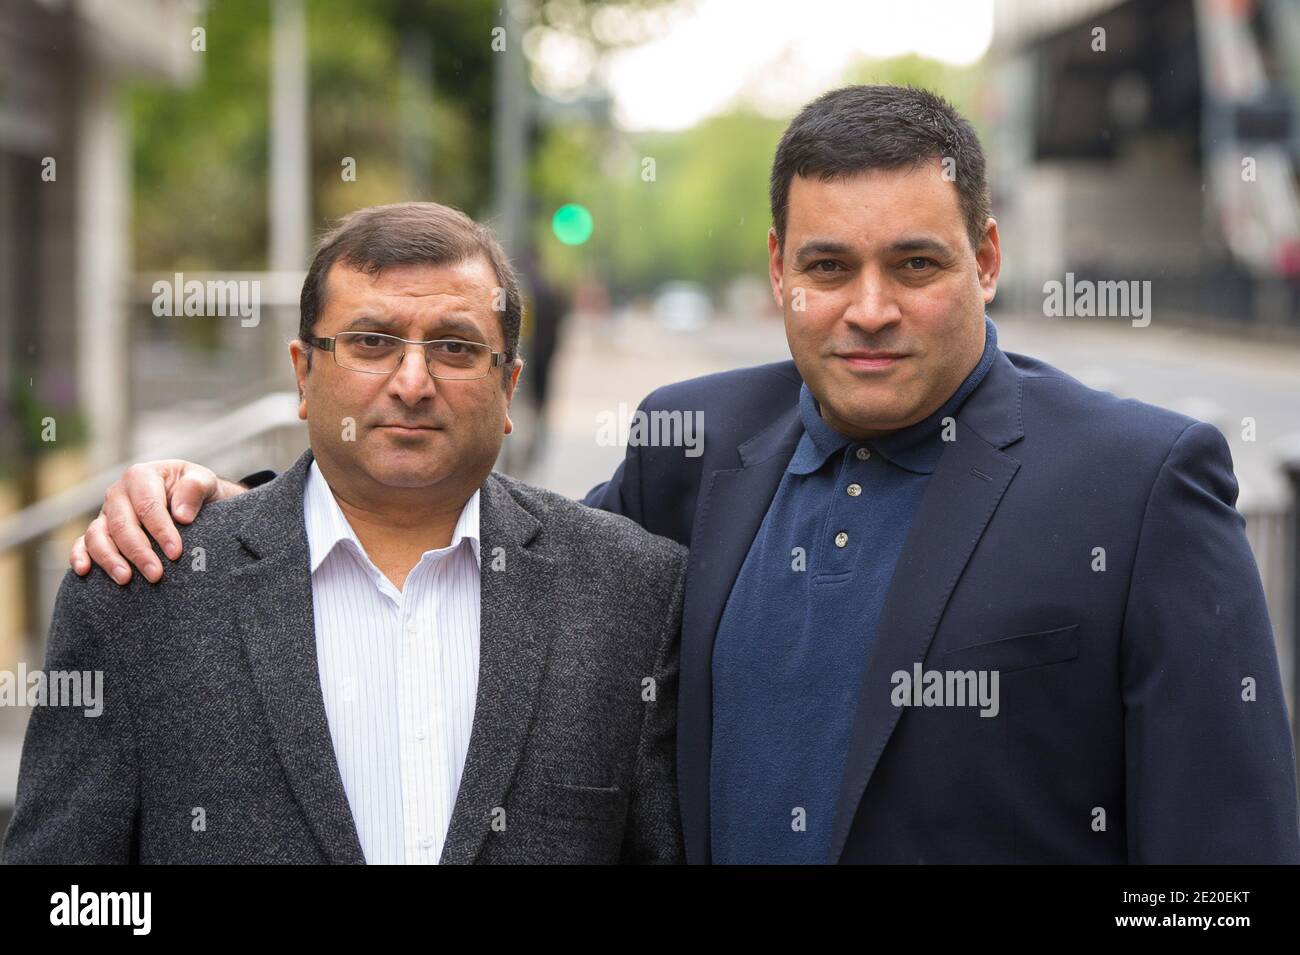 File photo dated 2/5/2017 of Ihsan Bashir (left) with the head of the Docklands victims' campaign group Jonathan Ganesh. The Government has been pressed to 'urgently release' a report into compensation for victims of IRA attacks linked to Libyan explosives. Shadow Northern Ireland secretary of state Louise Haigh made the call on behalf of victims of the 1996 Docklands bombings in London. Stock Photo